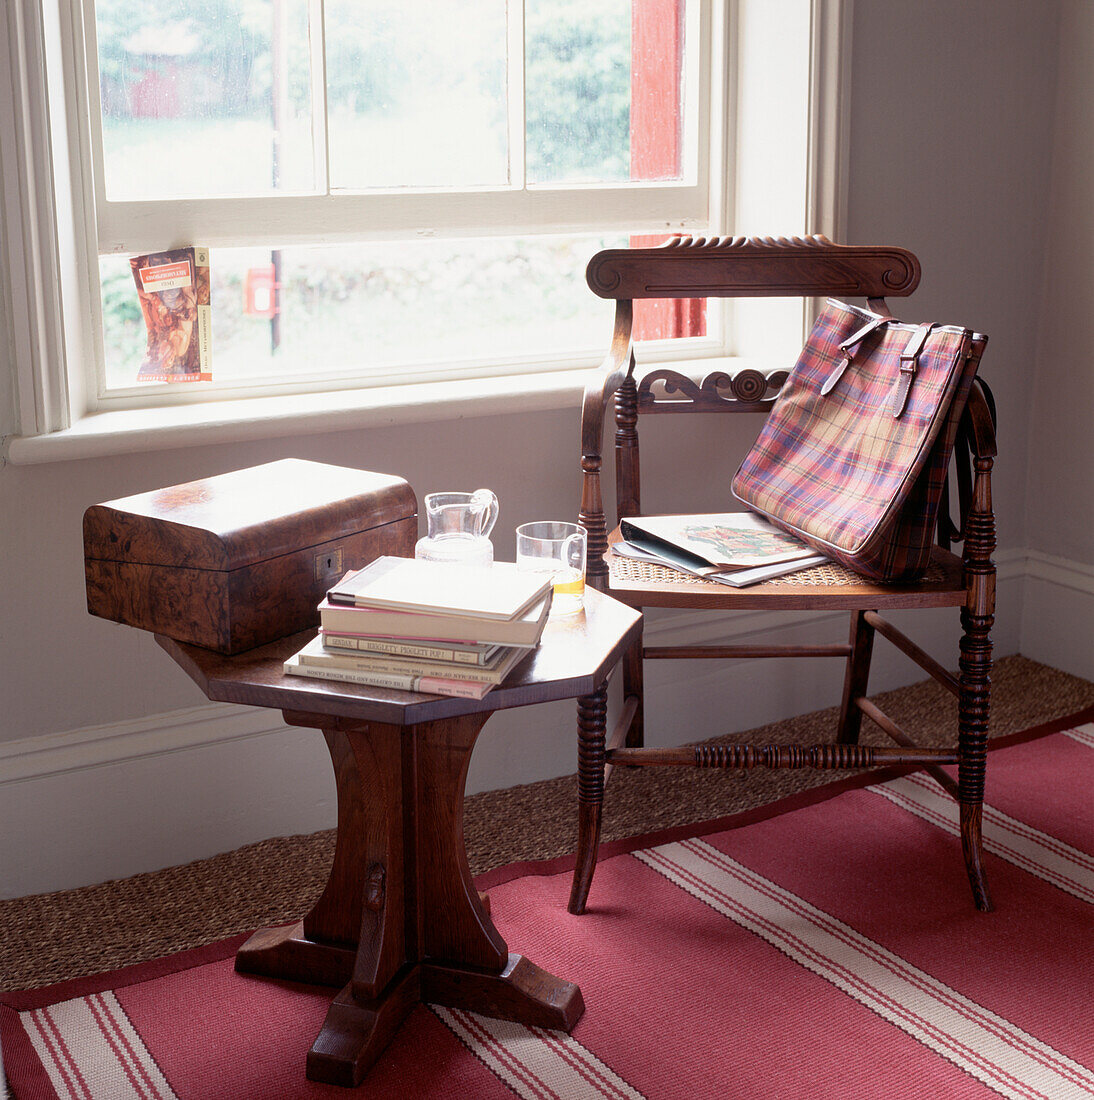 Oak chair with checked bag next to a side table with wooden box and water glass window propped open with a book in background